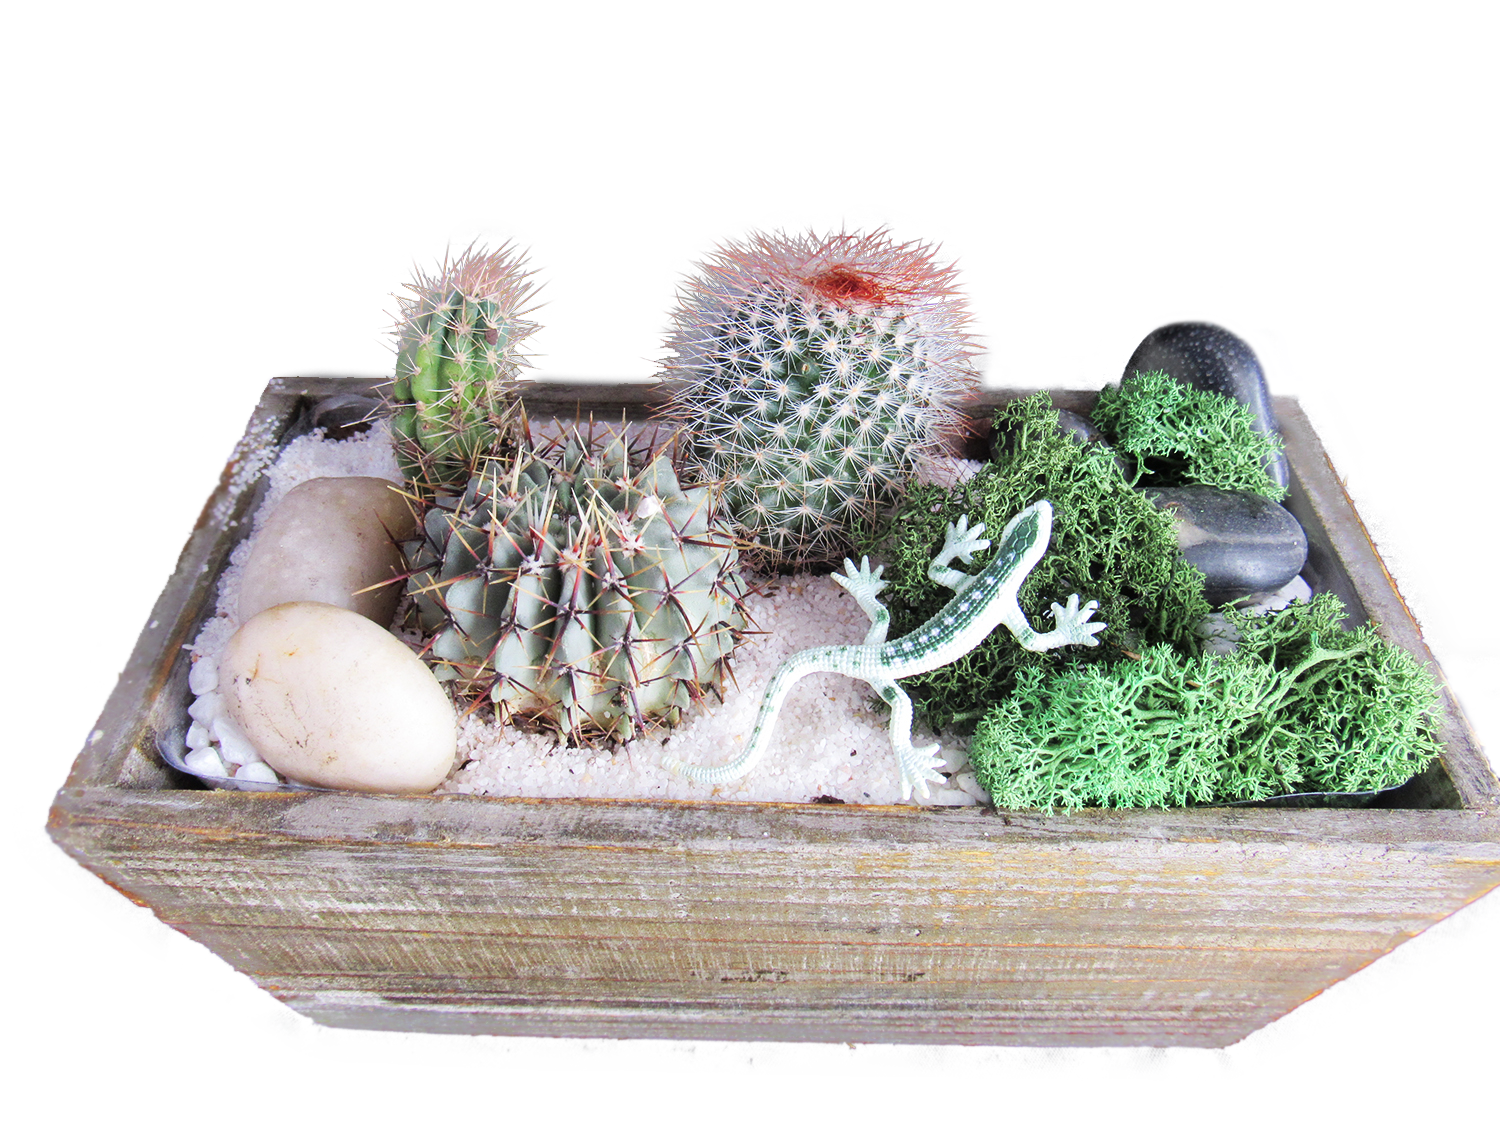 A Cacti Terrarium in Light Wood Rectangle Planter plant nite project by Yaymaker